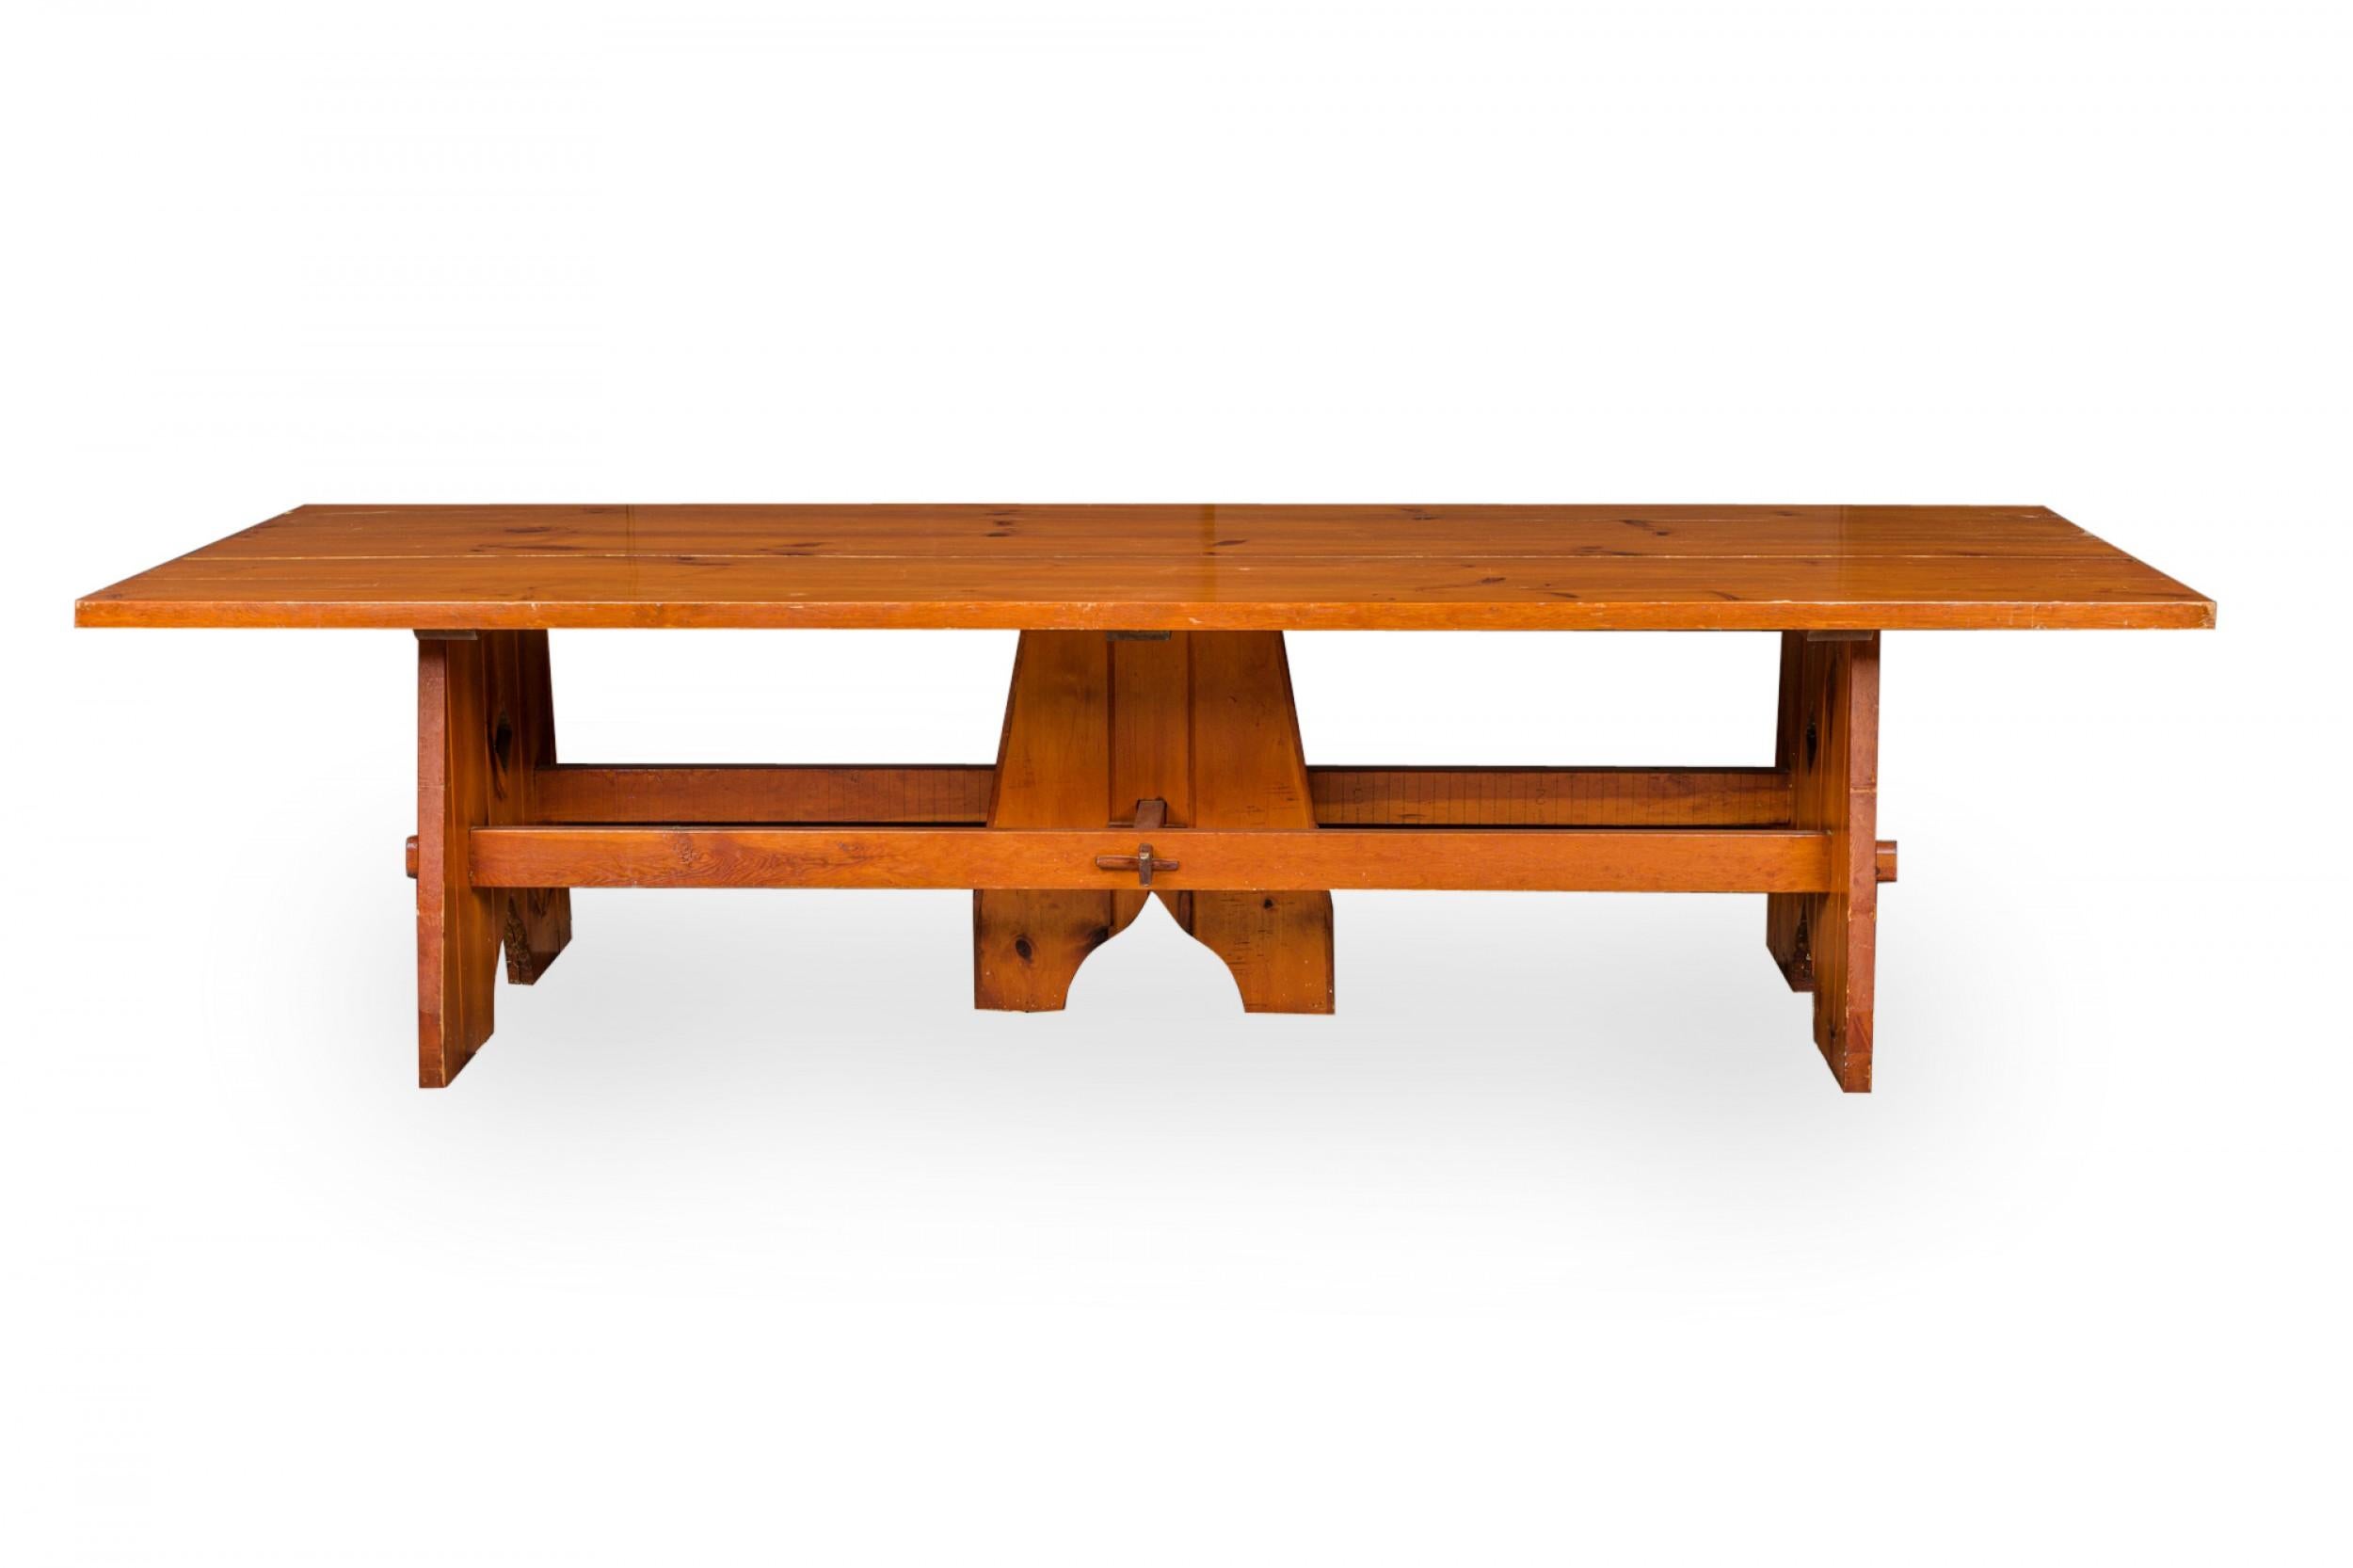 Rustic Adirondack-style (Mid-20th Century) large stained and sealed pine wood dining table with a rectangular plank wood top resting on a base comprised of three wide legs with a stretcher base and tusk and tenon joinery.